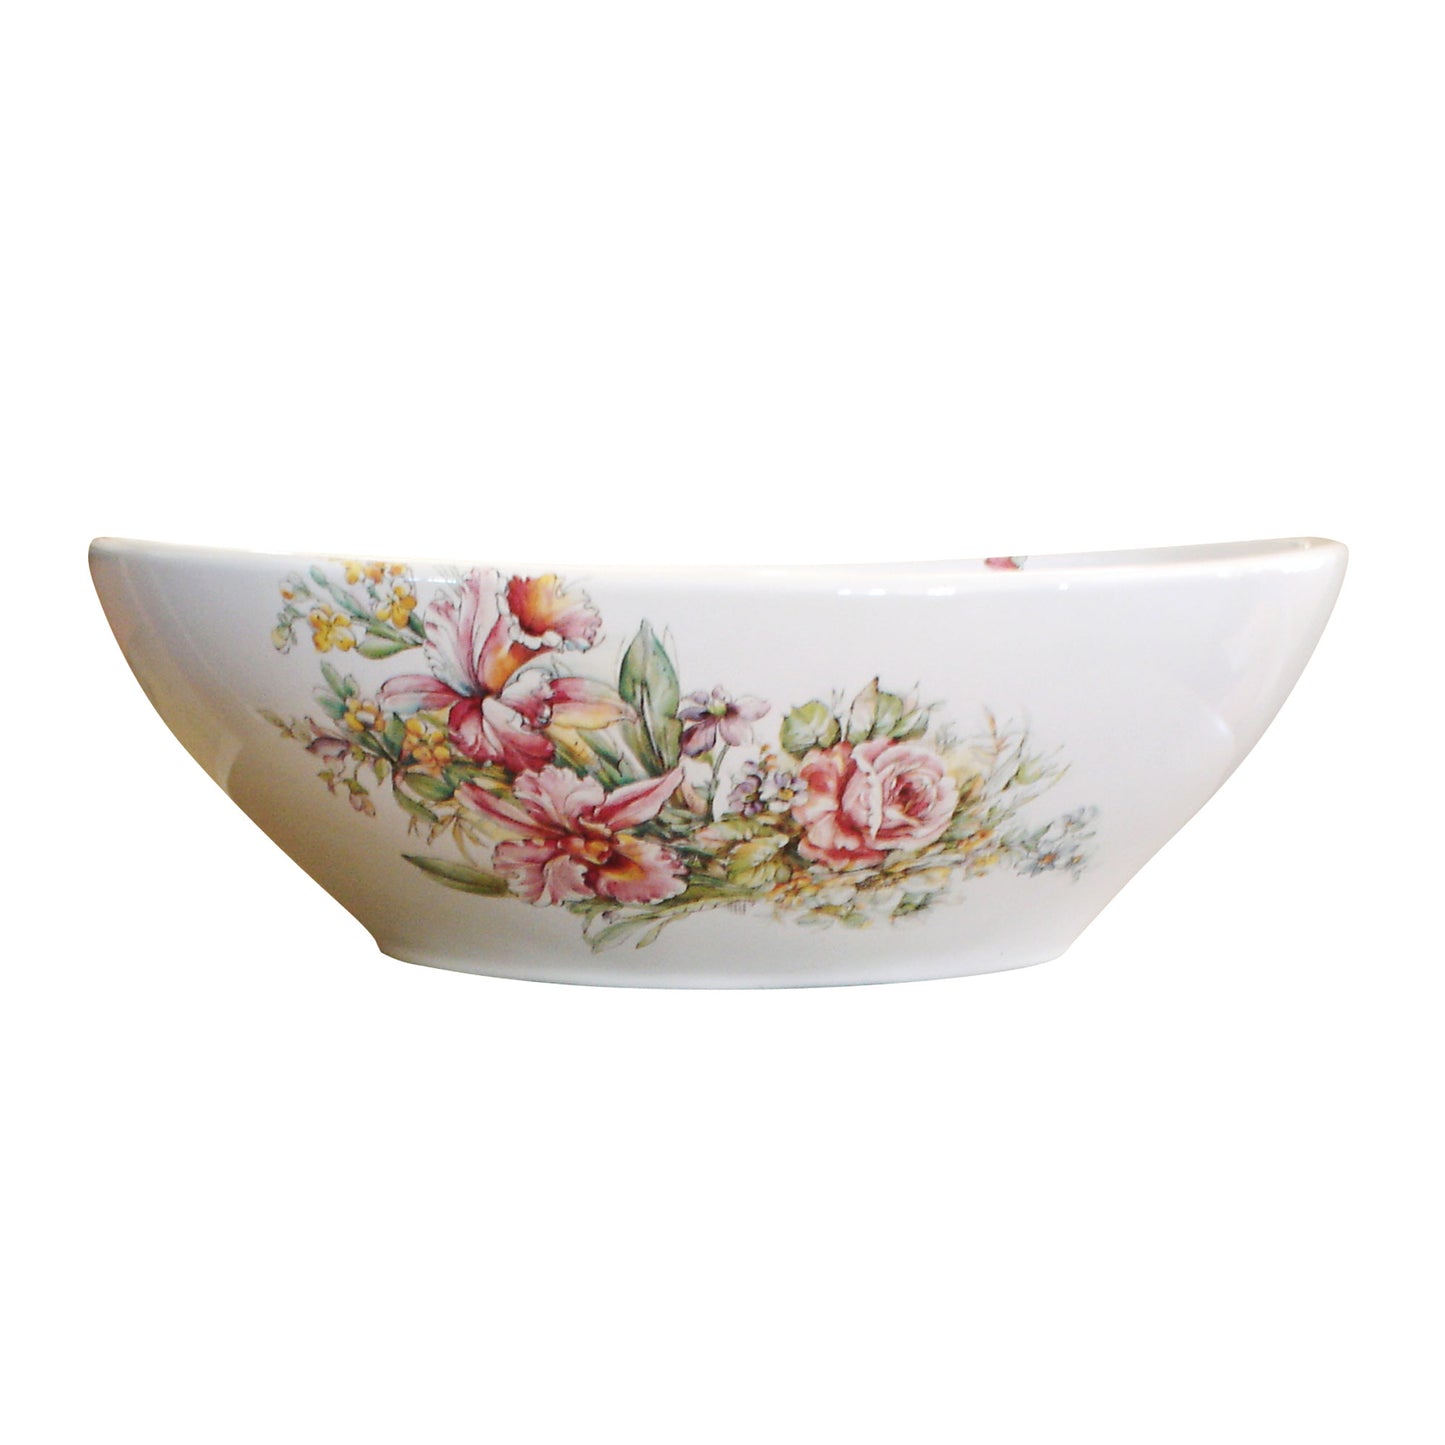 Front view of the Rococo Painted vessel sink with roses and Lillies.